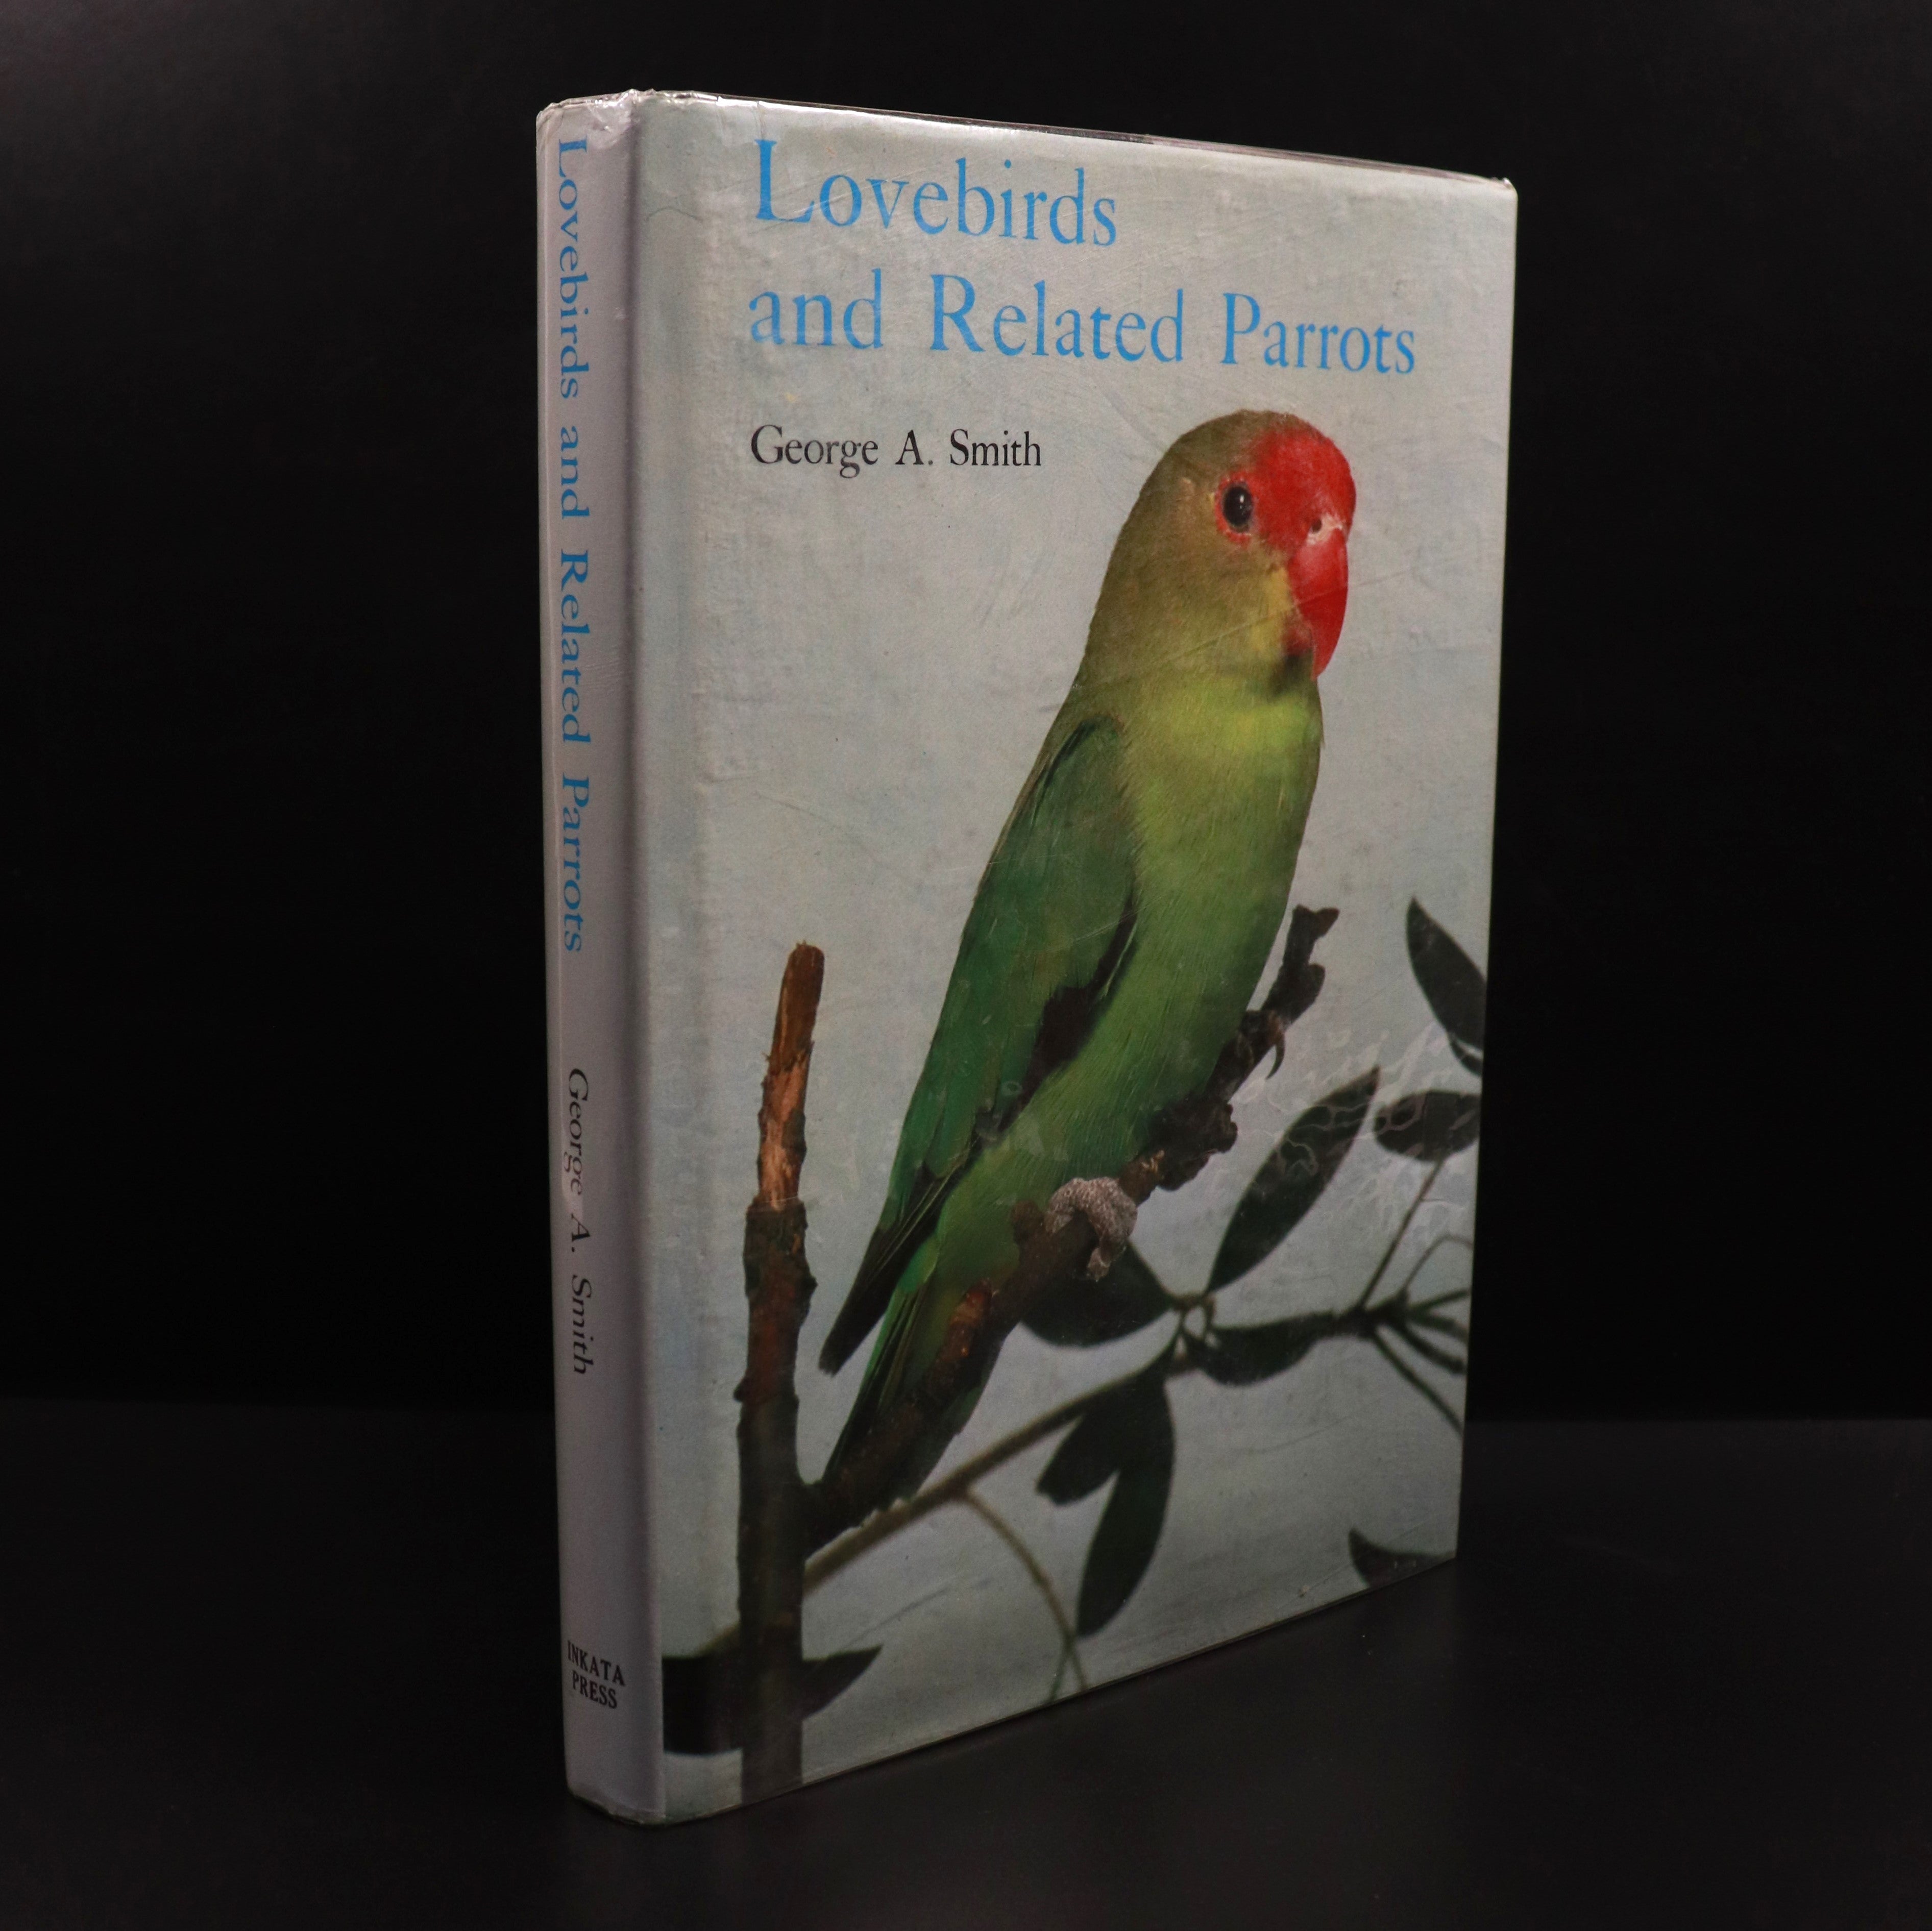 1979 Lovebirds & Related Parrots by George A. Smith Bird Reference Book Signed